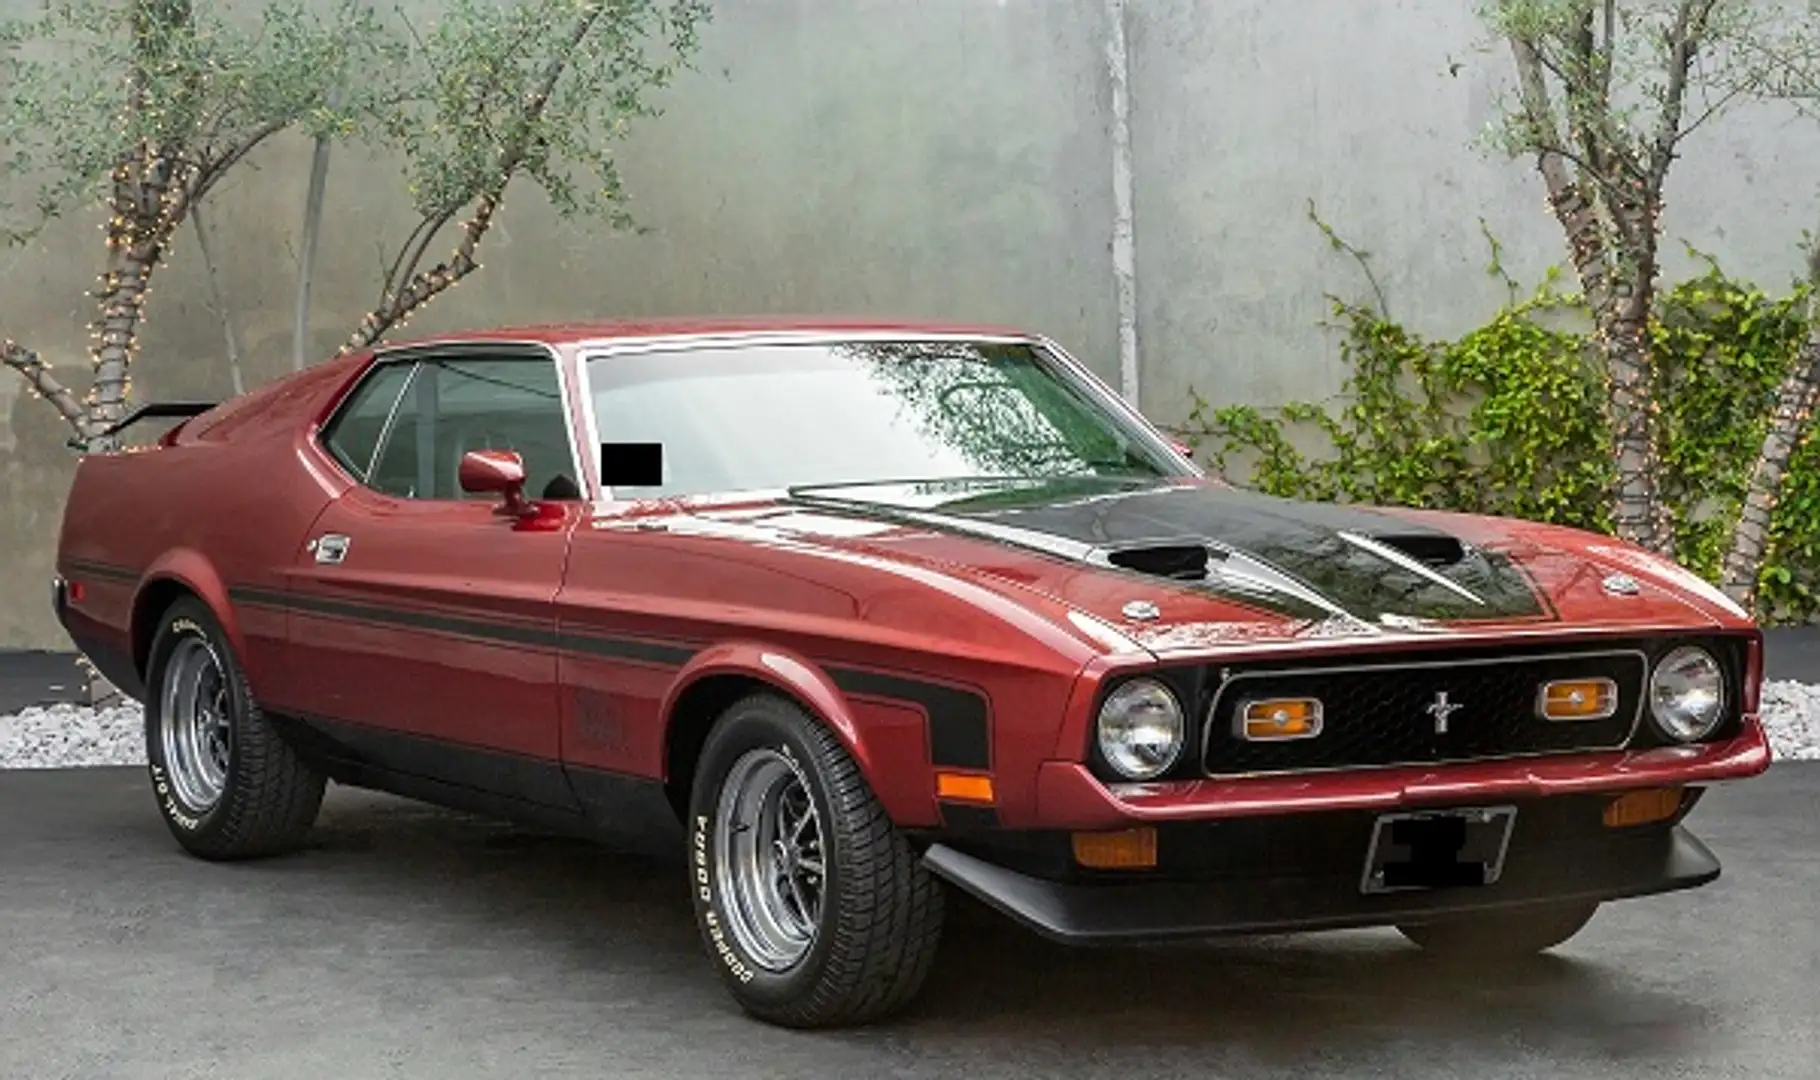 Ford Mustang Mach 1 - 1